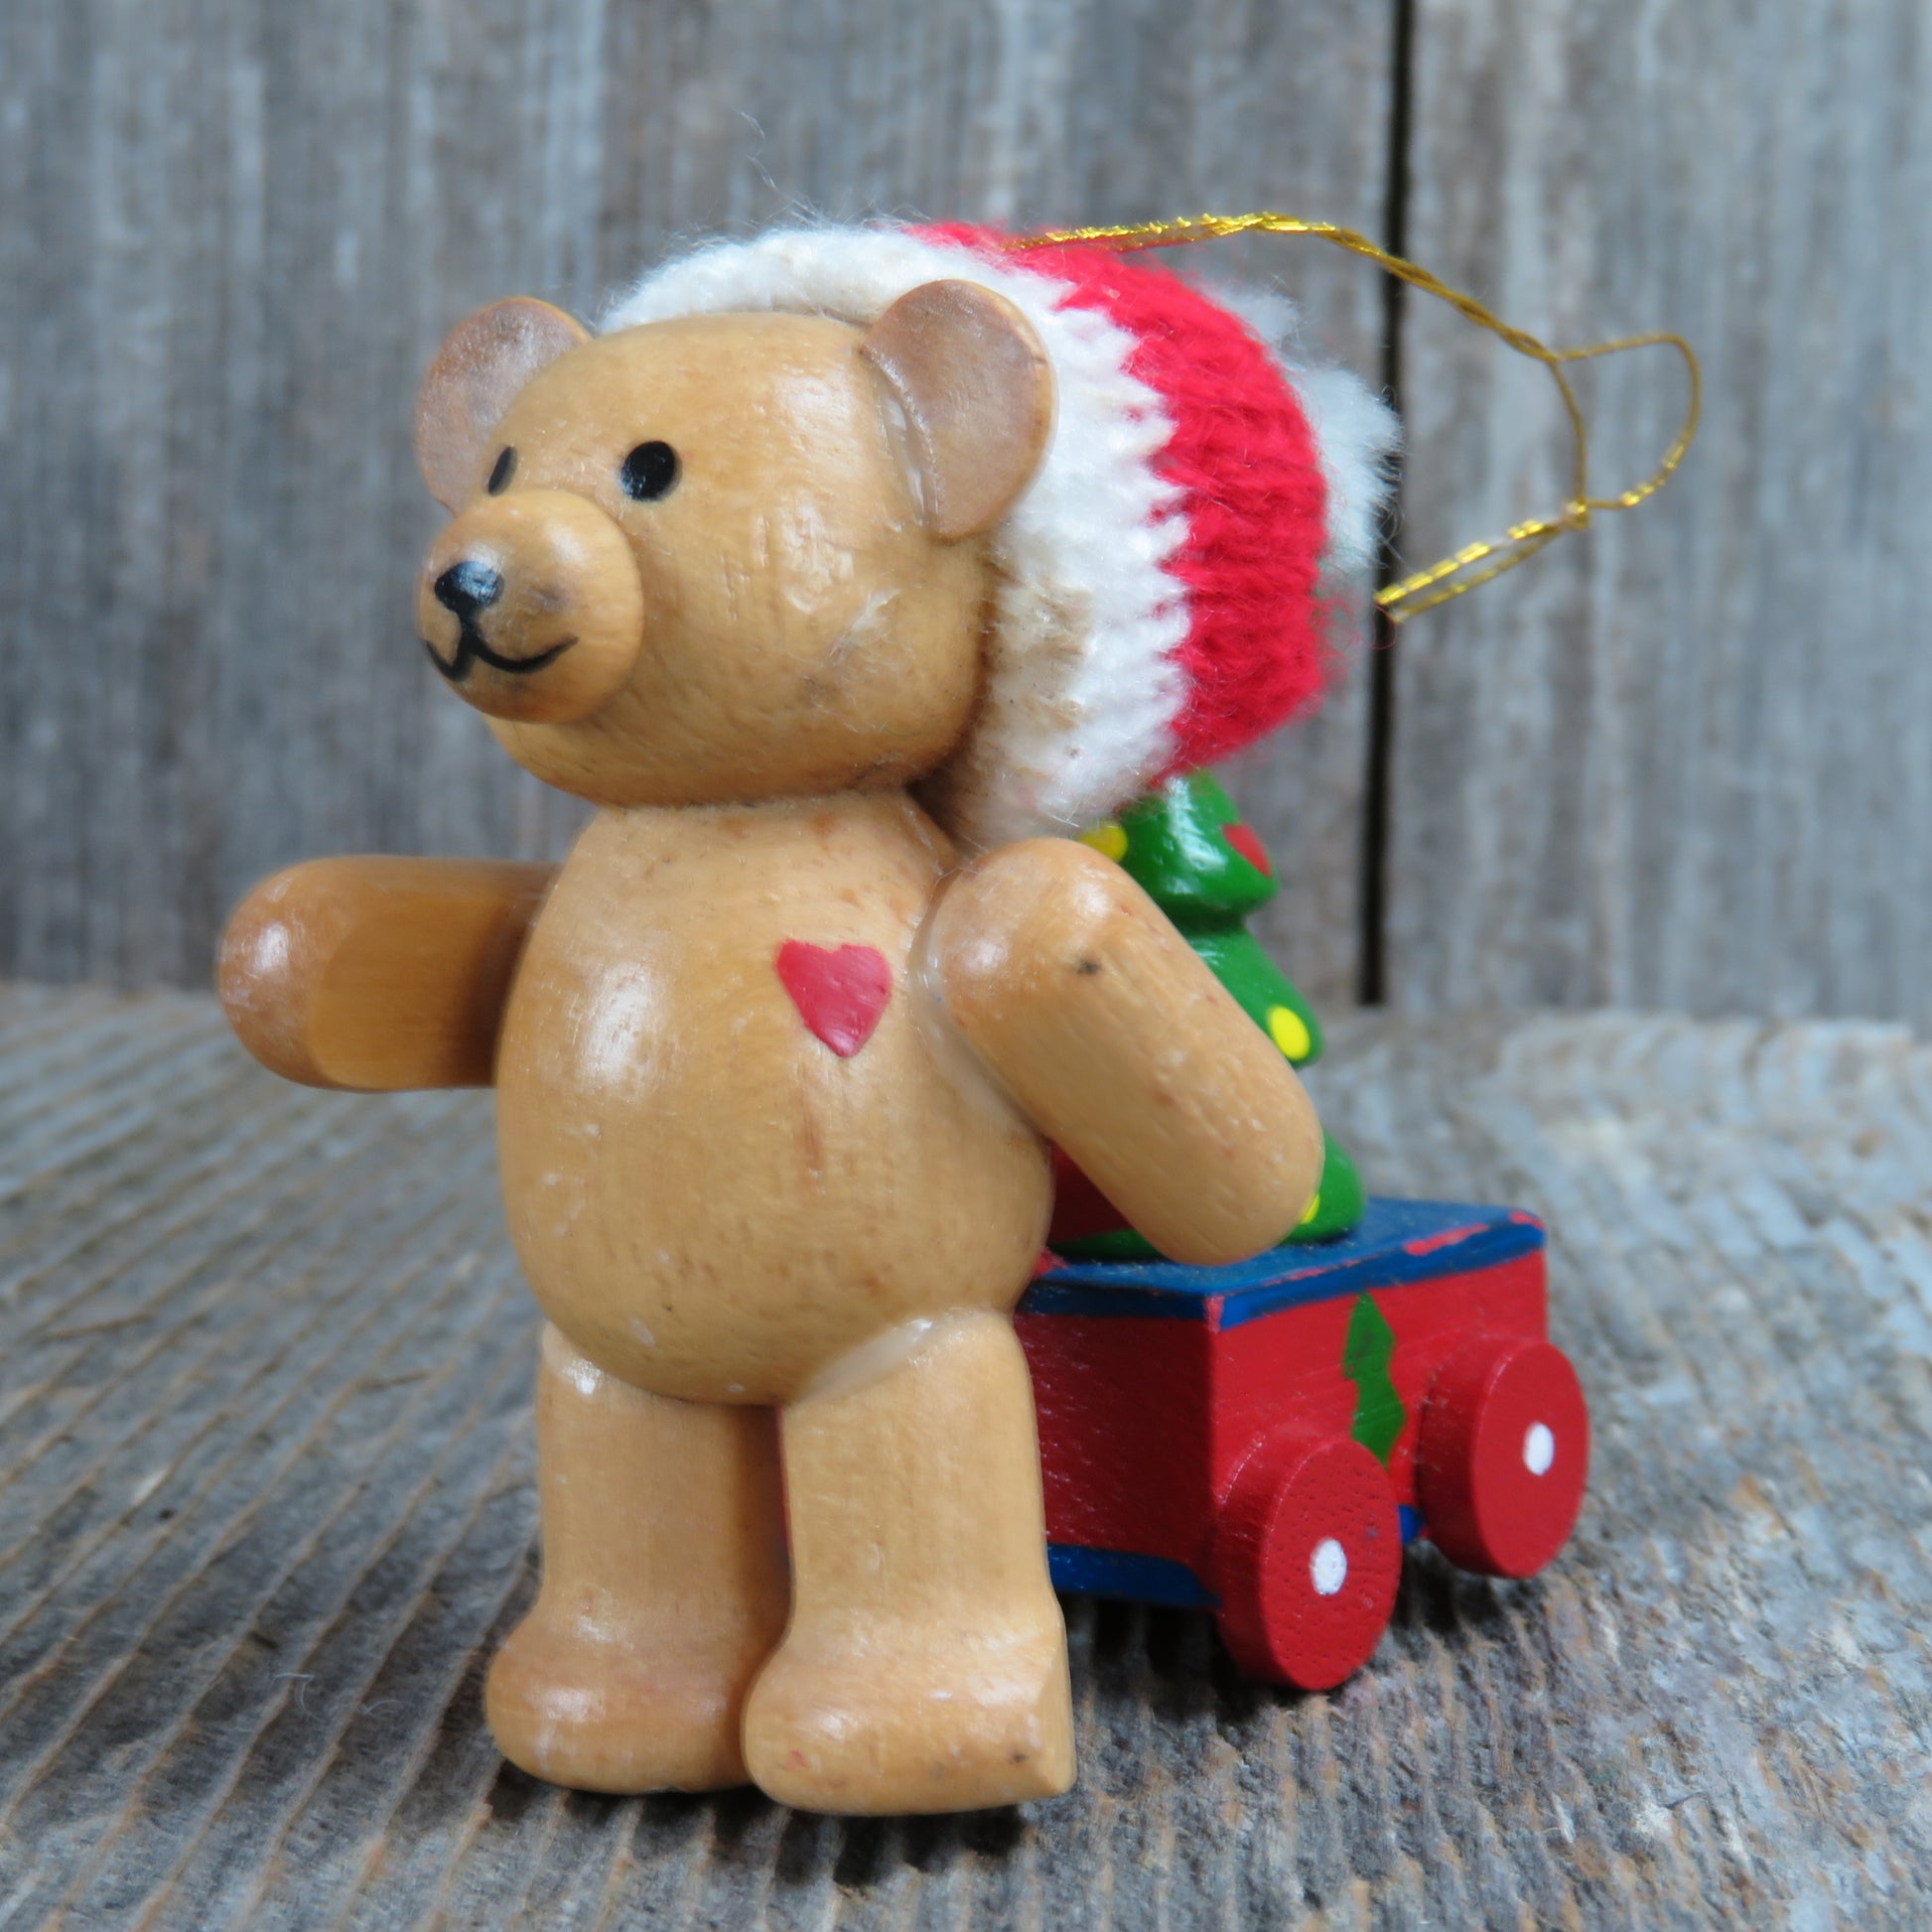 Vintage Teddy Bear with Toy Wagon Wood Christmas Ornament Tree Wooden Knit Hat - At Grandma's Table